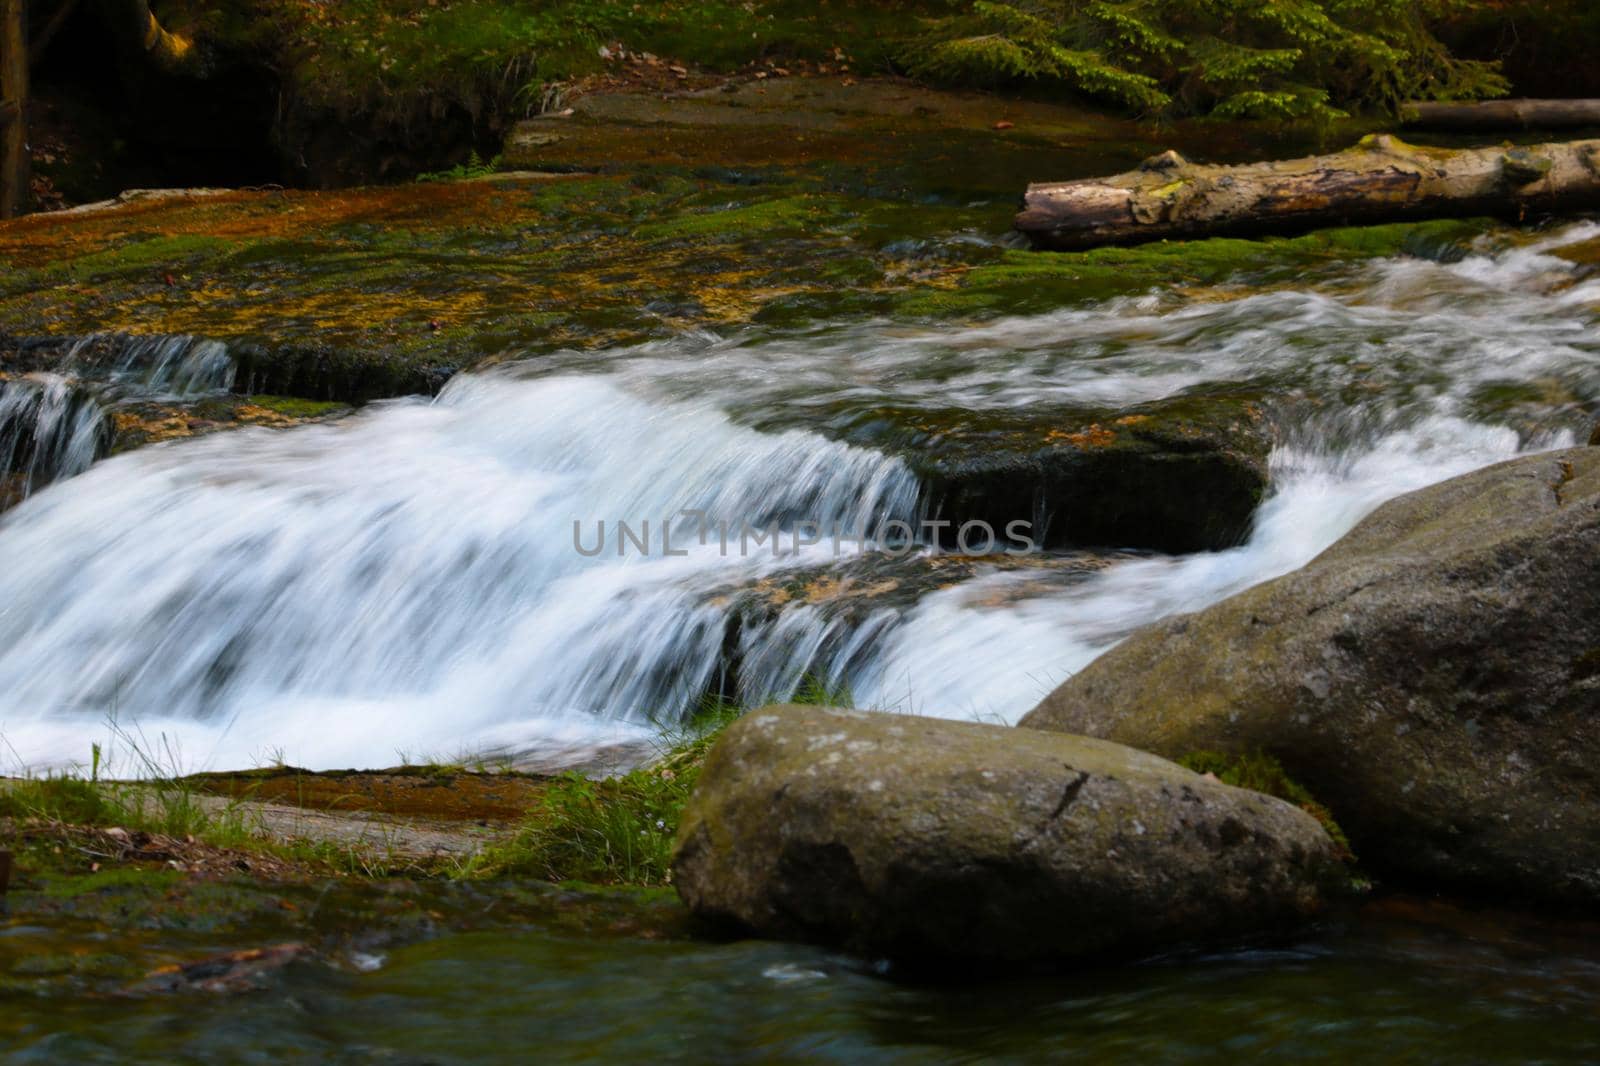 Cold clear water flows through the rocks in the forest, spring